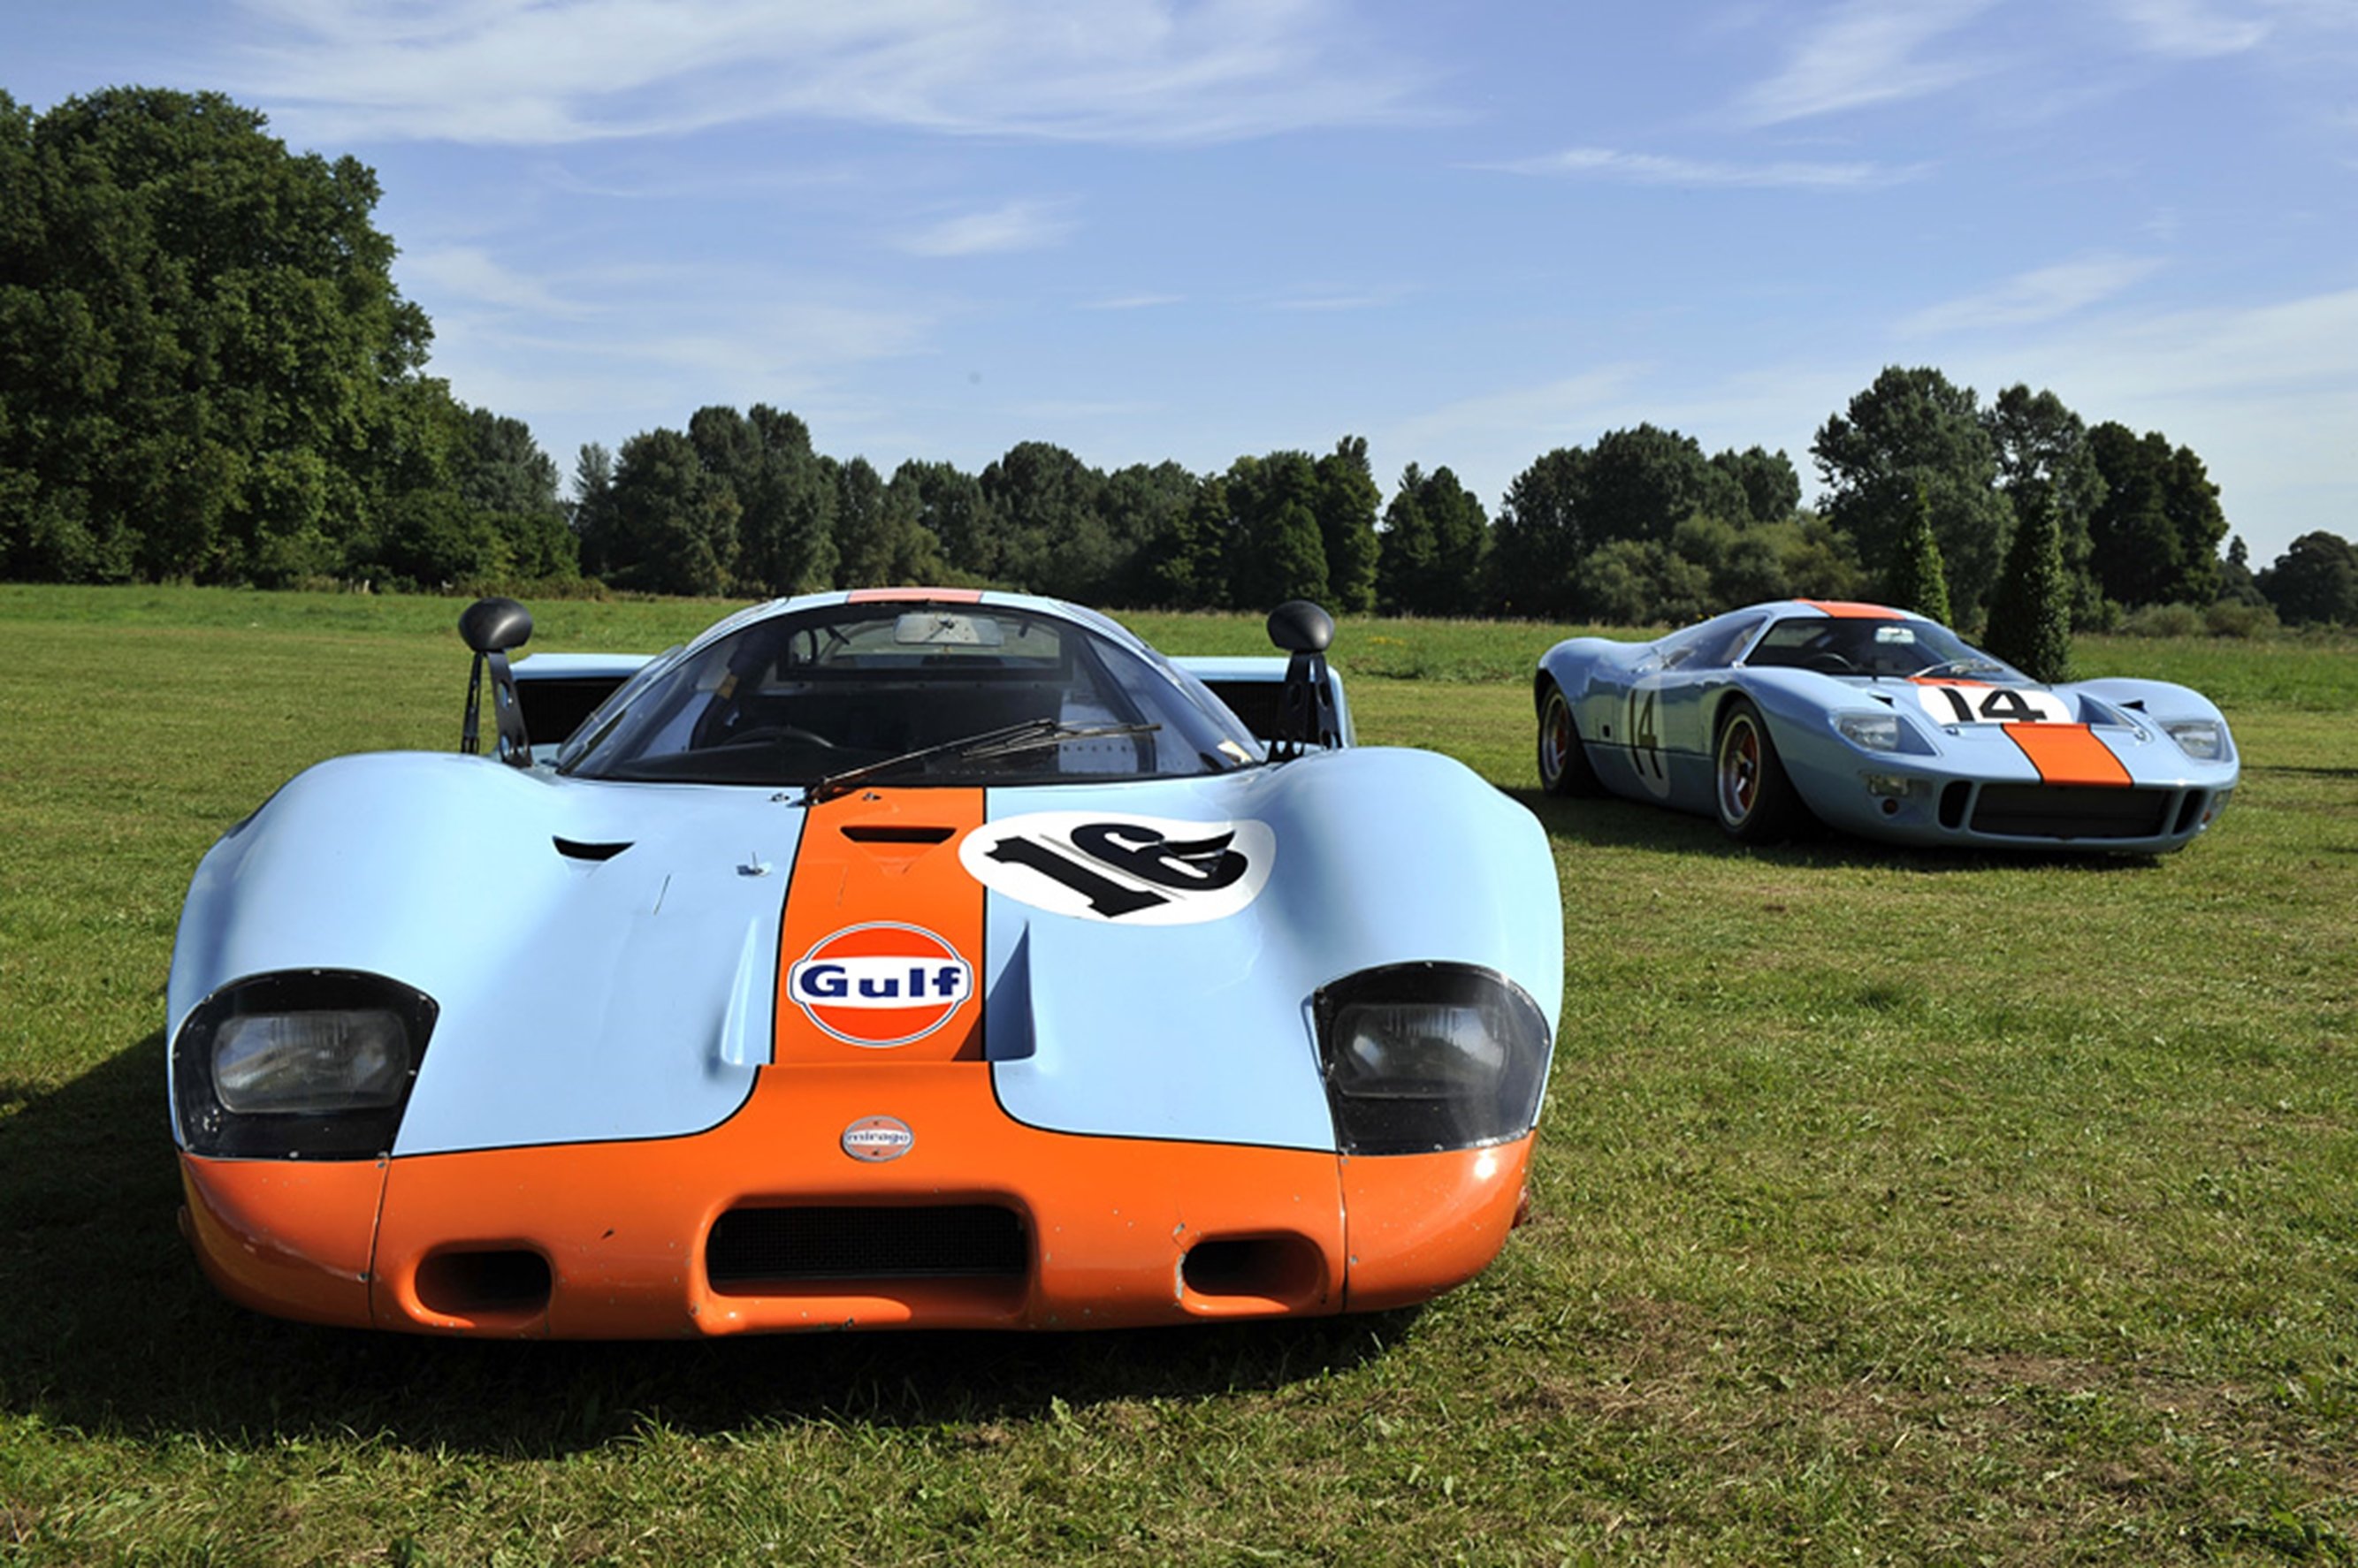 race, Car, Classic, Vehicle, Racing, Mirage, Ford, Gt 40, Gulf, Le mans, Lmp1, 2667x1779 Wallpaper